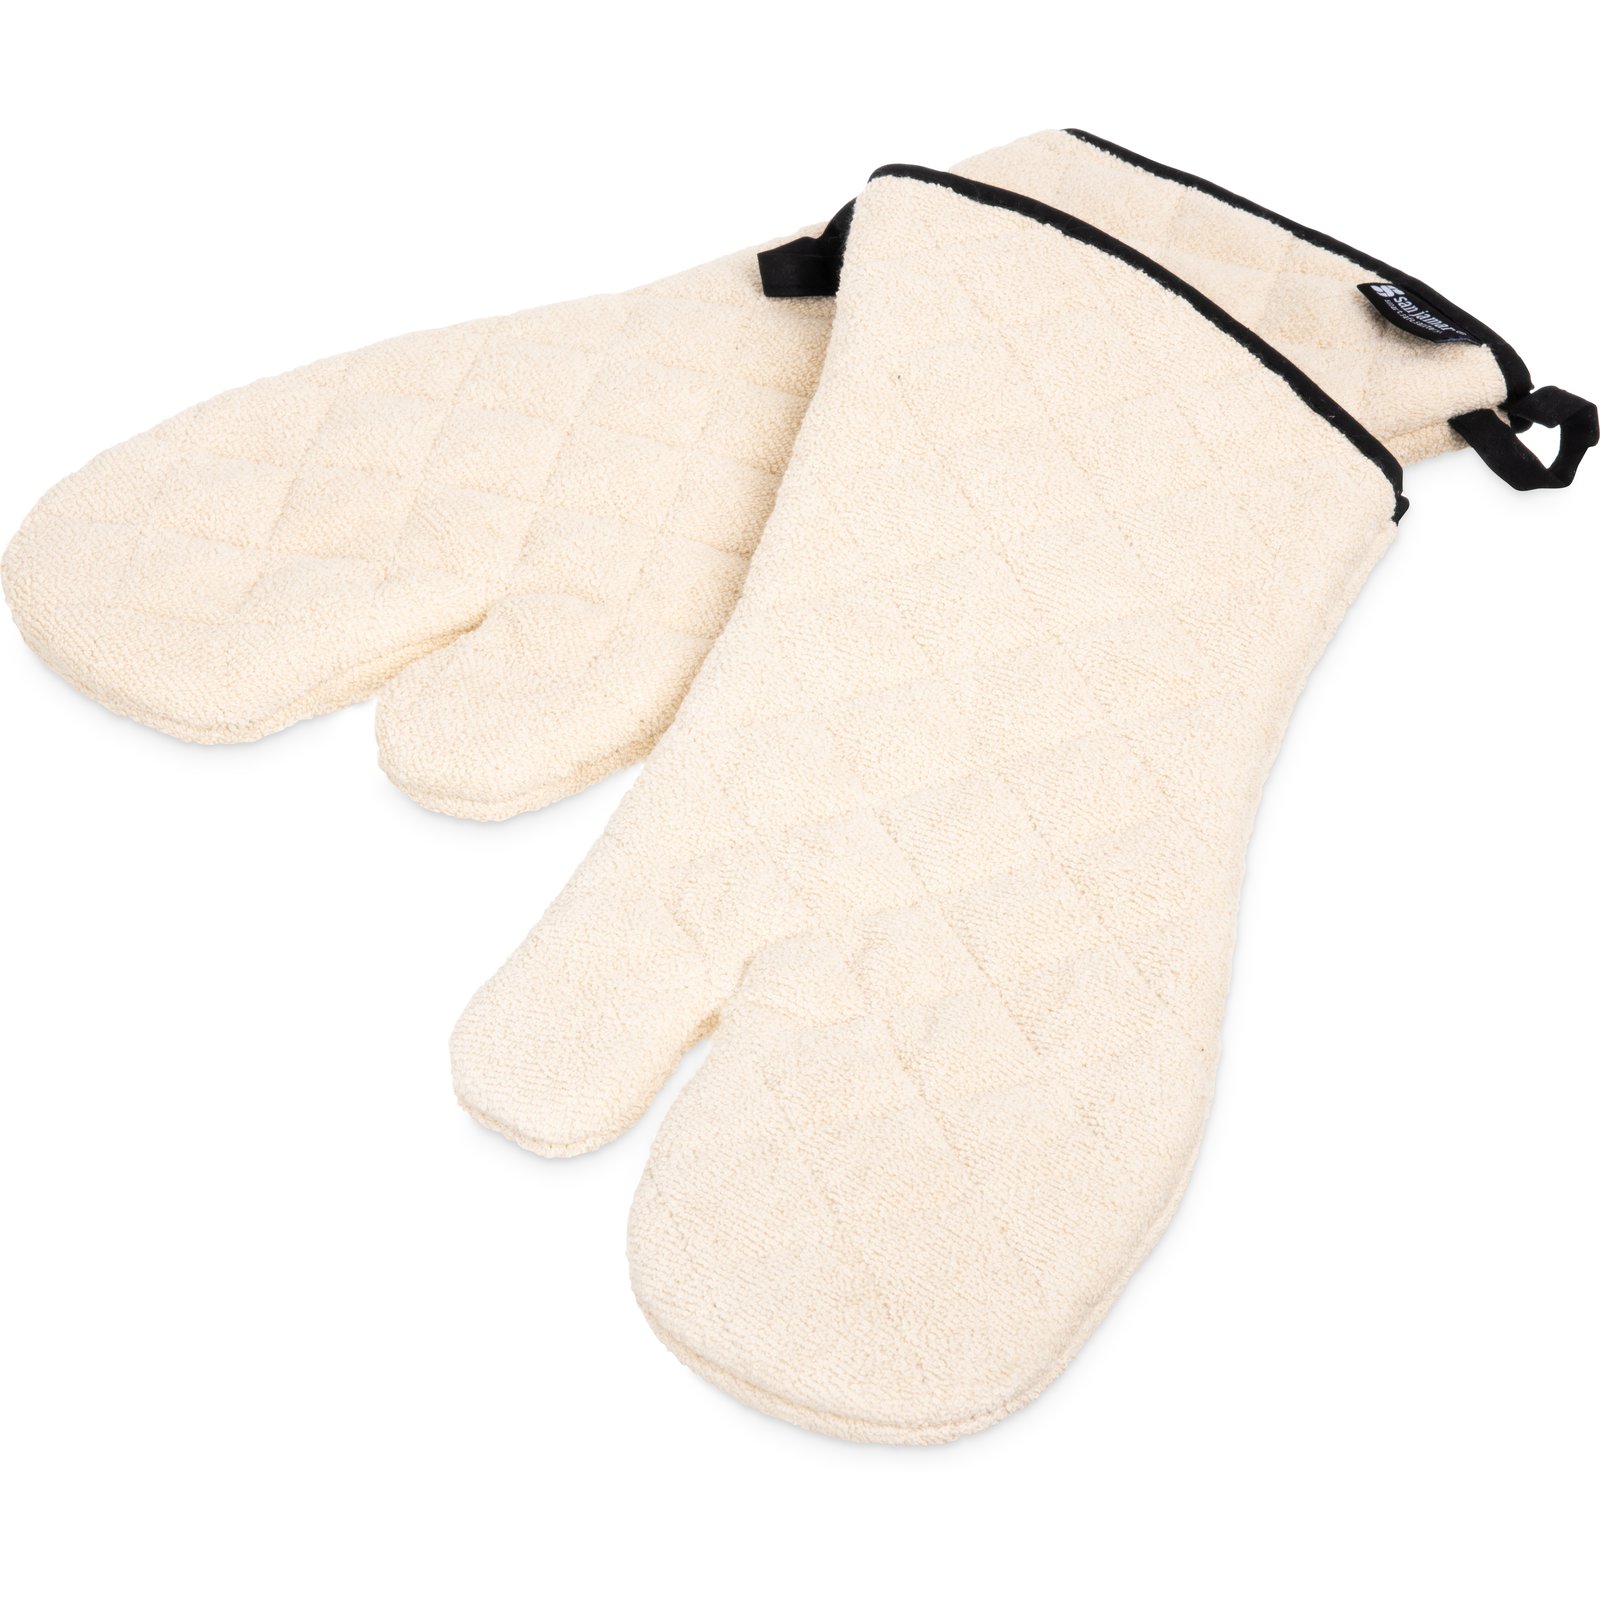 RETIRED PAMPERED CHEF Beige Terry Cloth Oven Mitt 1326 ~Gently